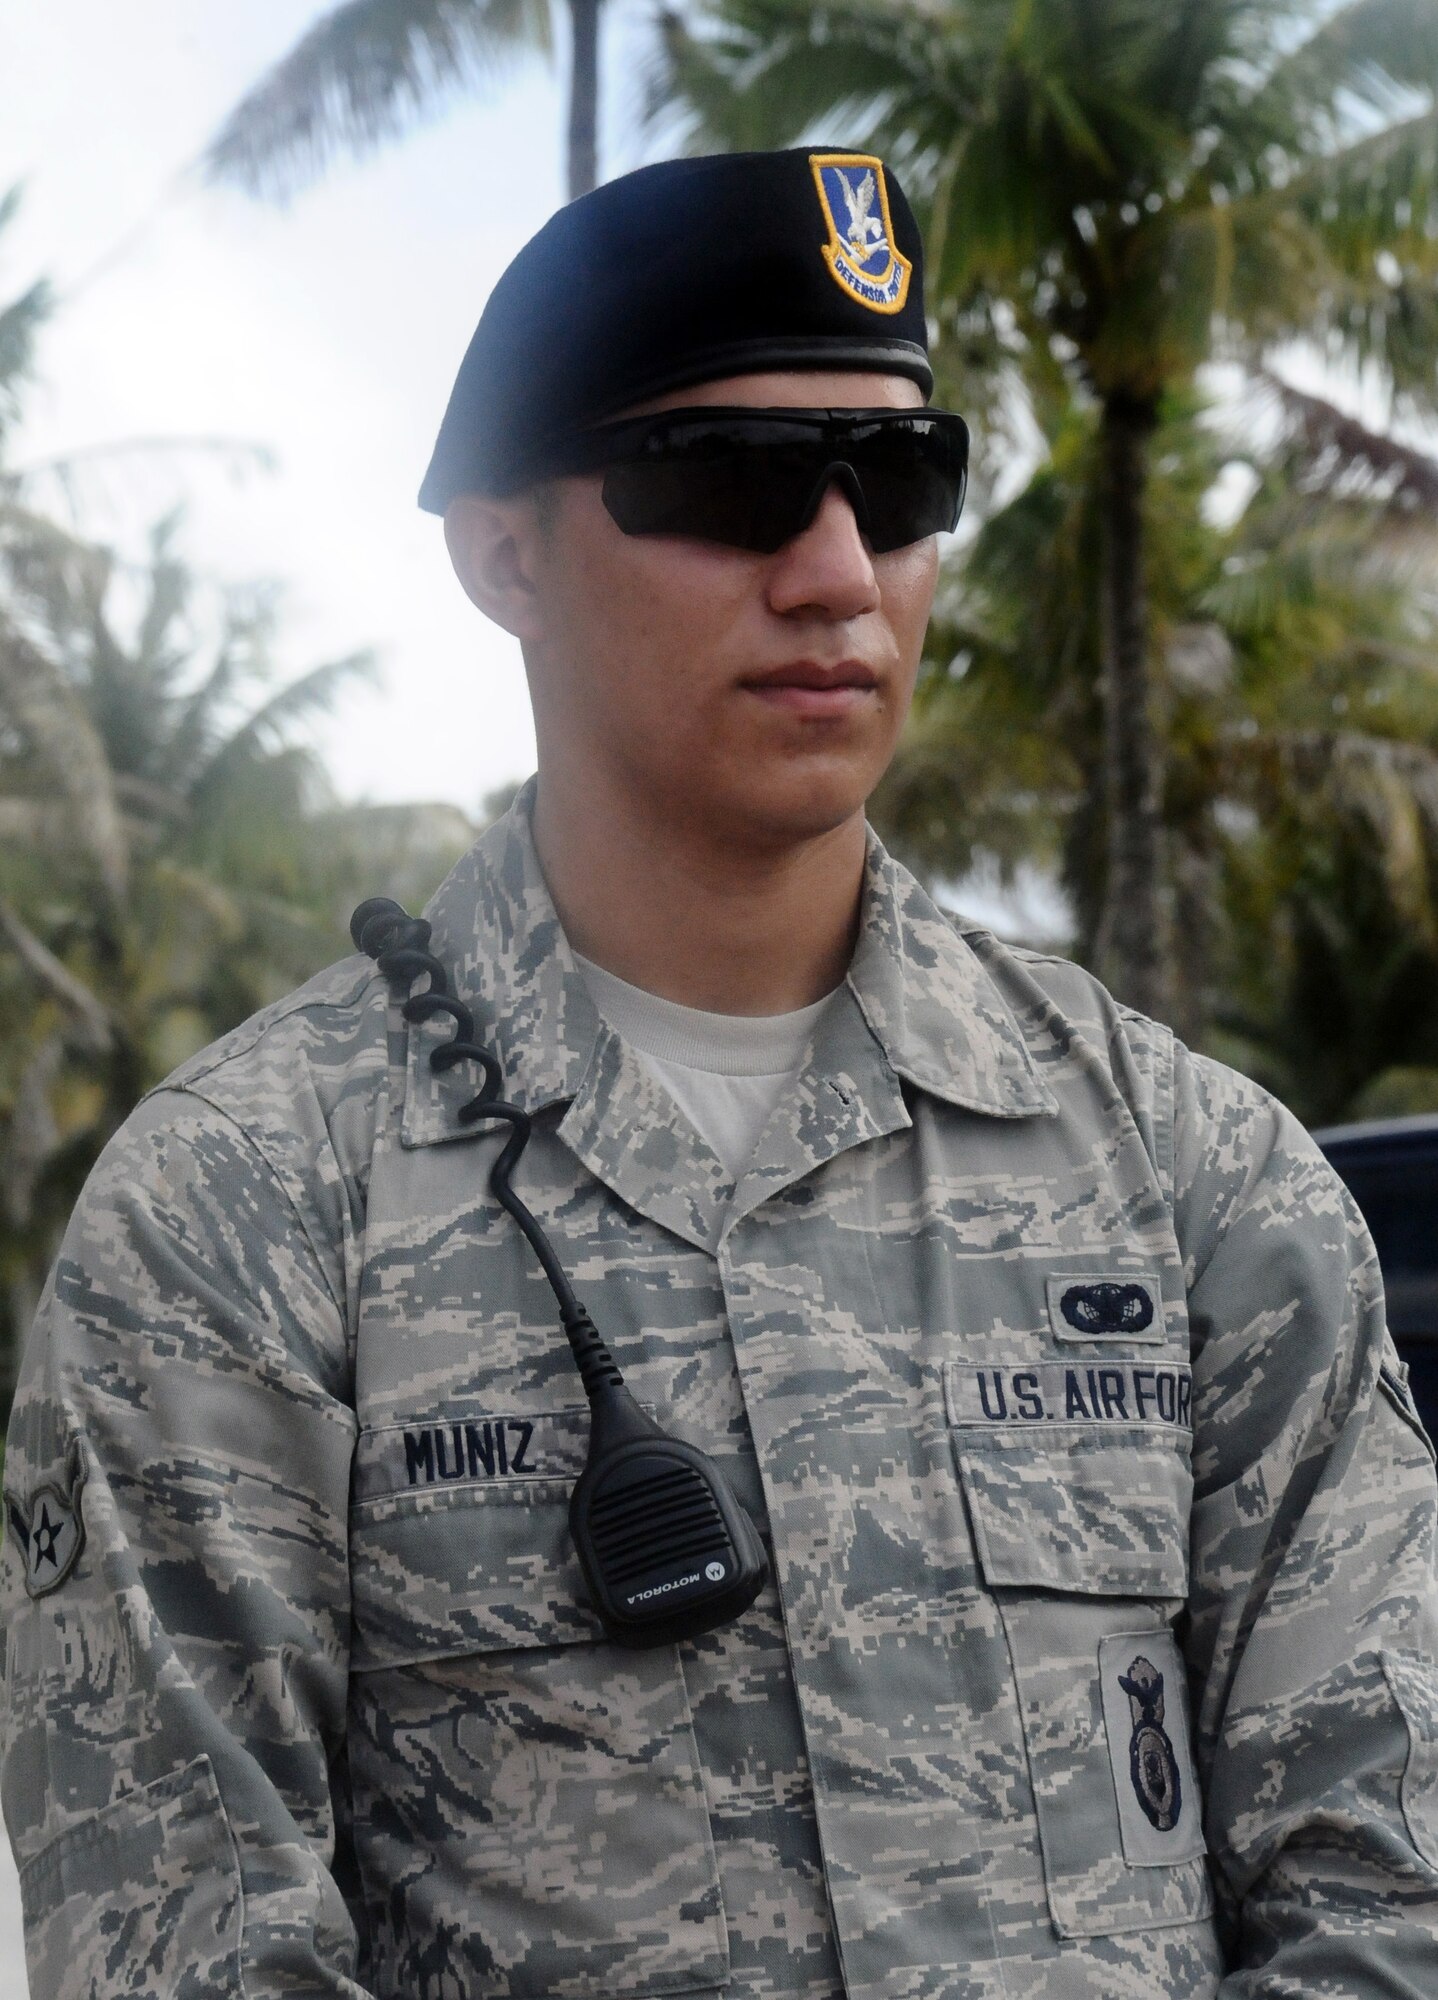 Airman Alan Muniz, a dedicated gate guard from the 36th Security Forces Squadron, stands watch at the main gate at Andersen Air Force Base, Guam, Jan. 2, 2013. The purpose of the dedicated gate guard section is to reflect the highest standards of military bearing and the profession of arms while ensuring access to Andersen is given only to those with proper credentials. ( U.S. Air Force photo by Airman 1st Class Mariah Haddenham/Released)